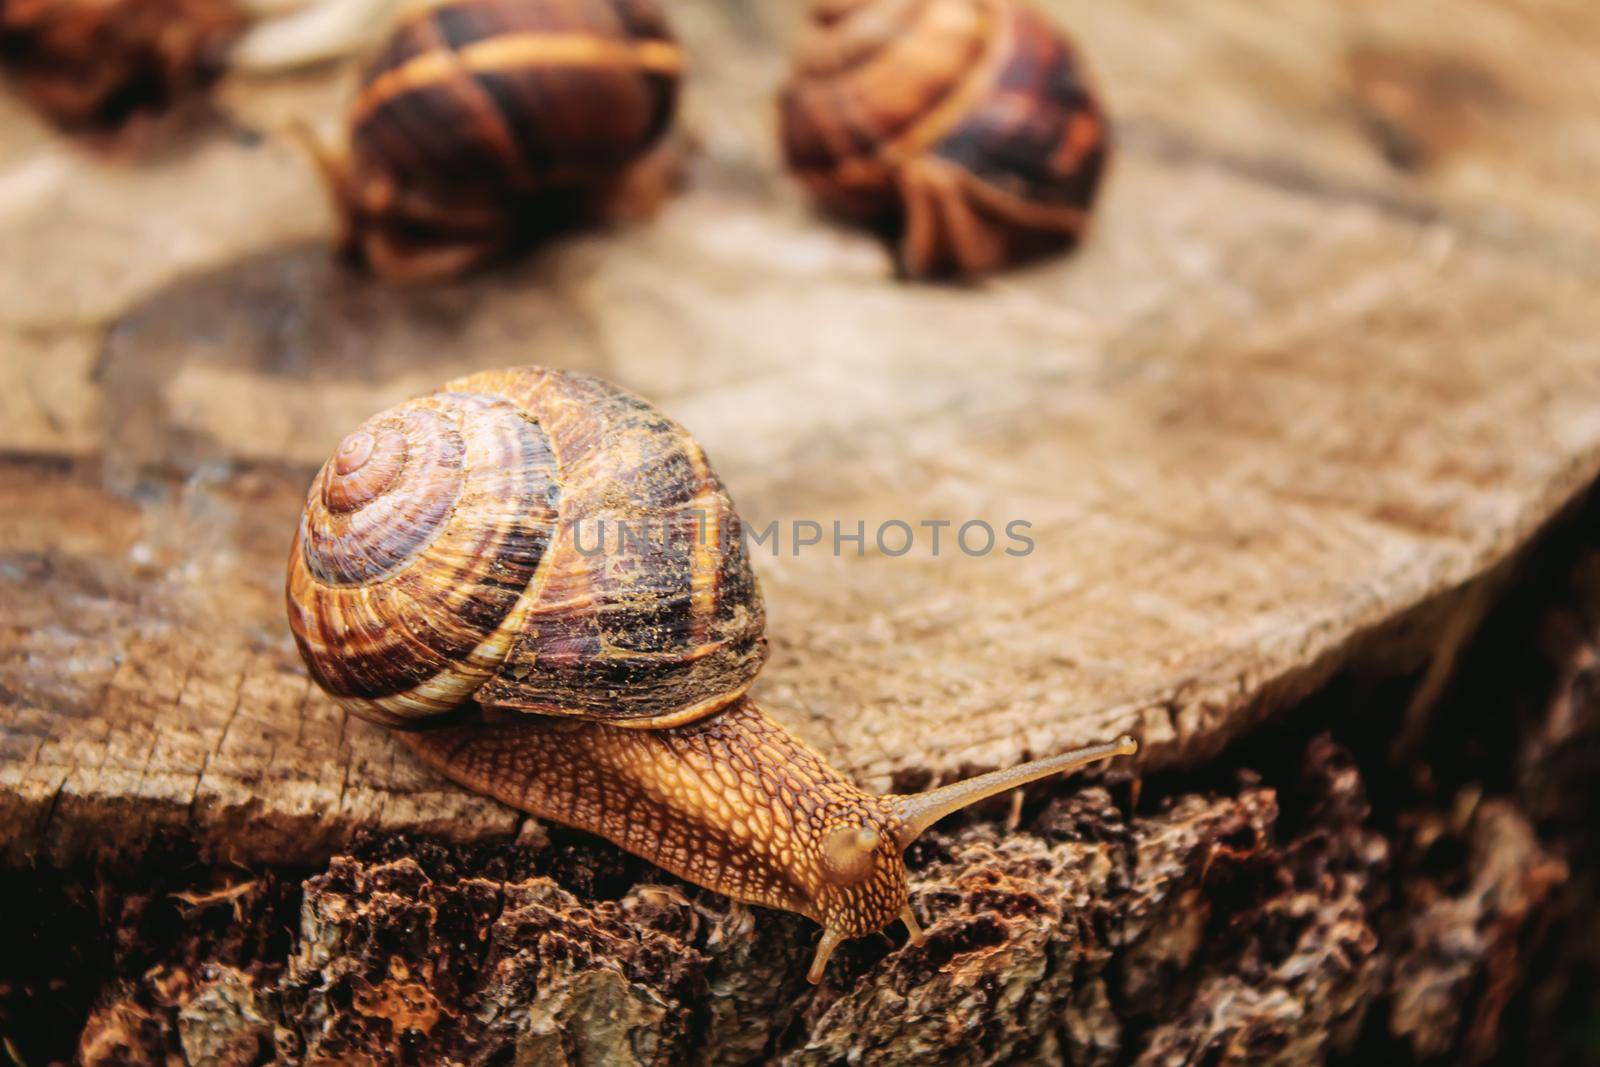 Snails in nature on a tree. Selective focus. Nature